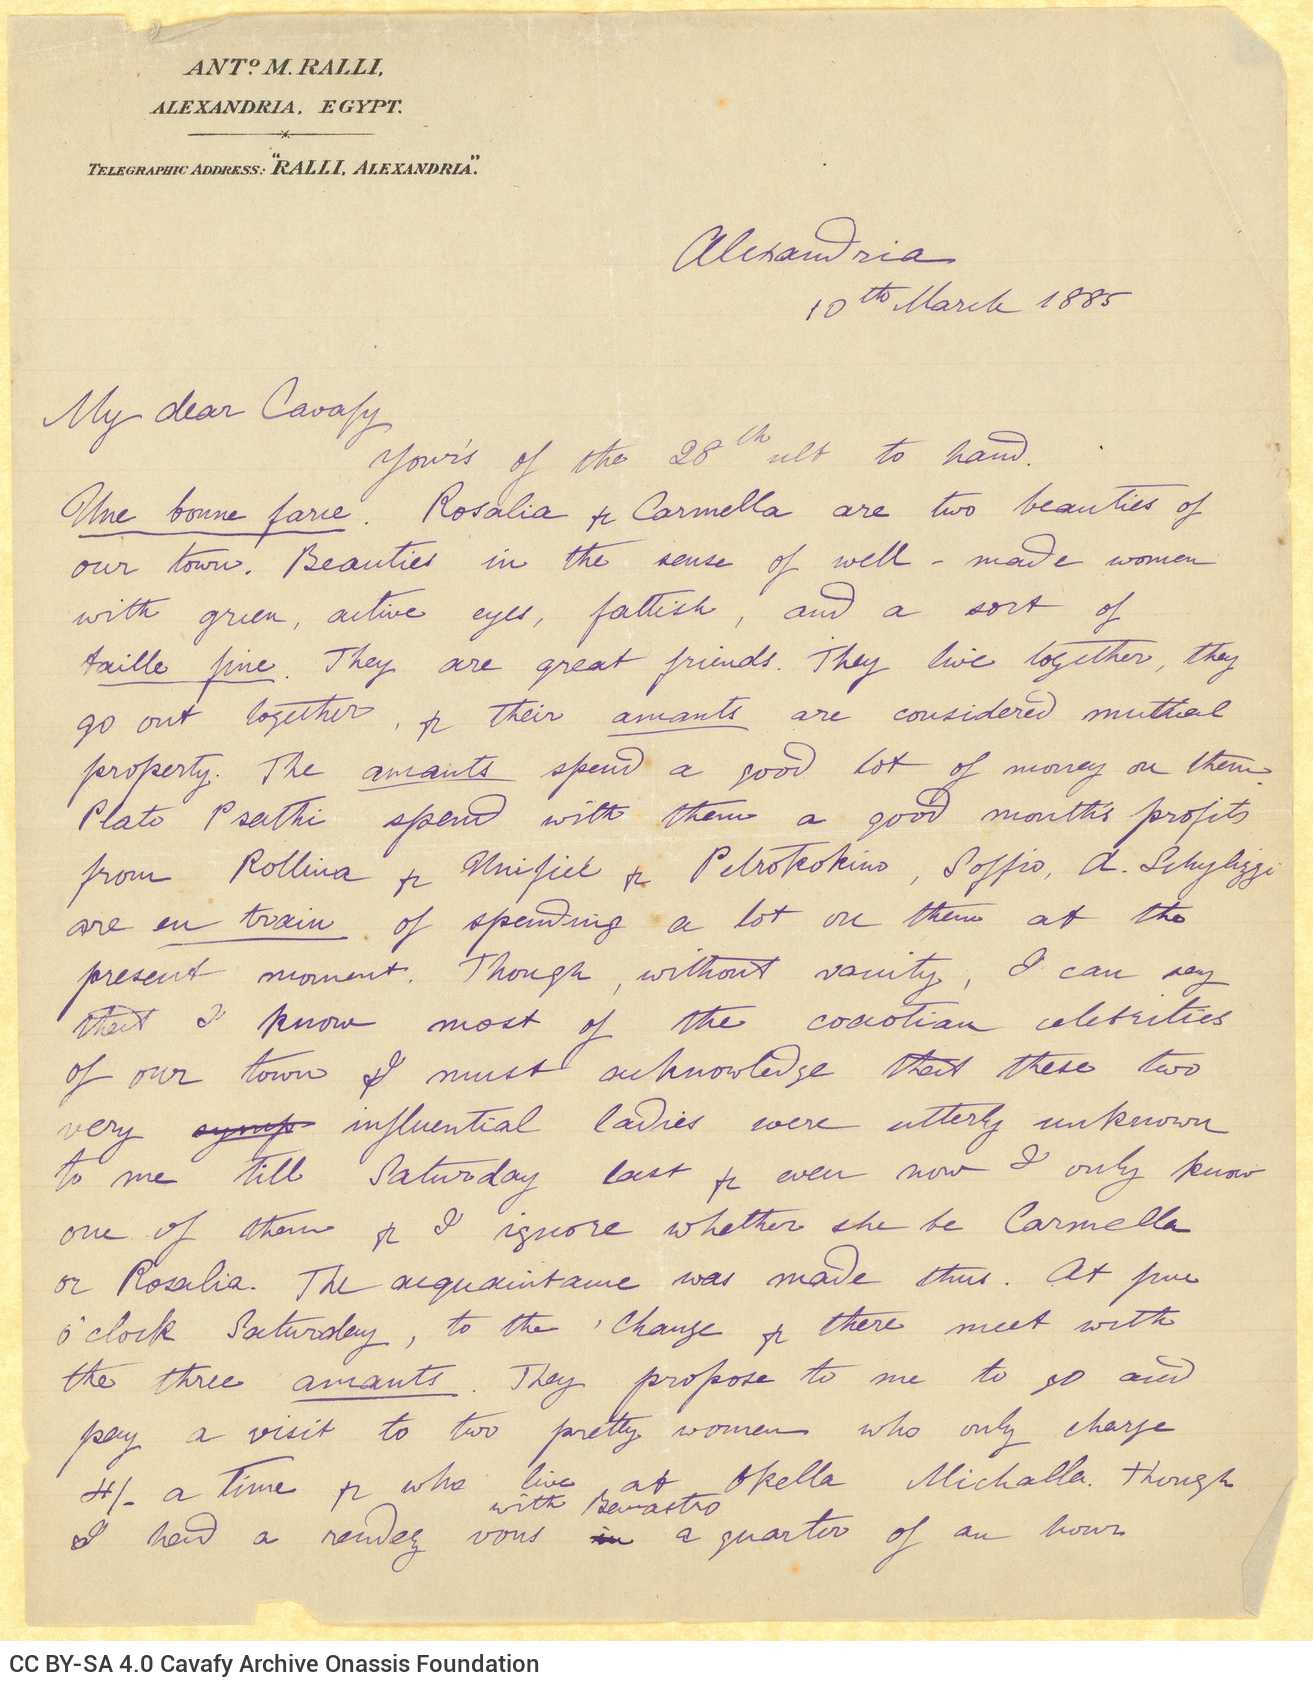 Handwritten letter by Mike Ralli to Cavafy on the recto of four sheets. It is a reply to a letter dated 28 February. Extensiv